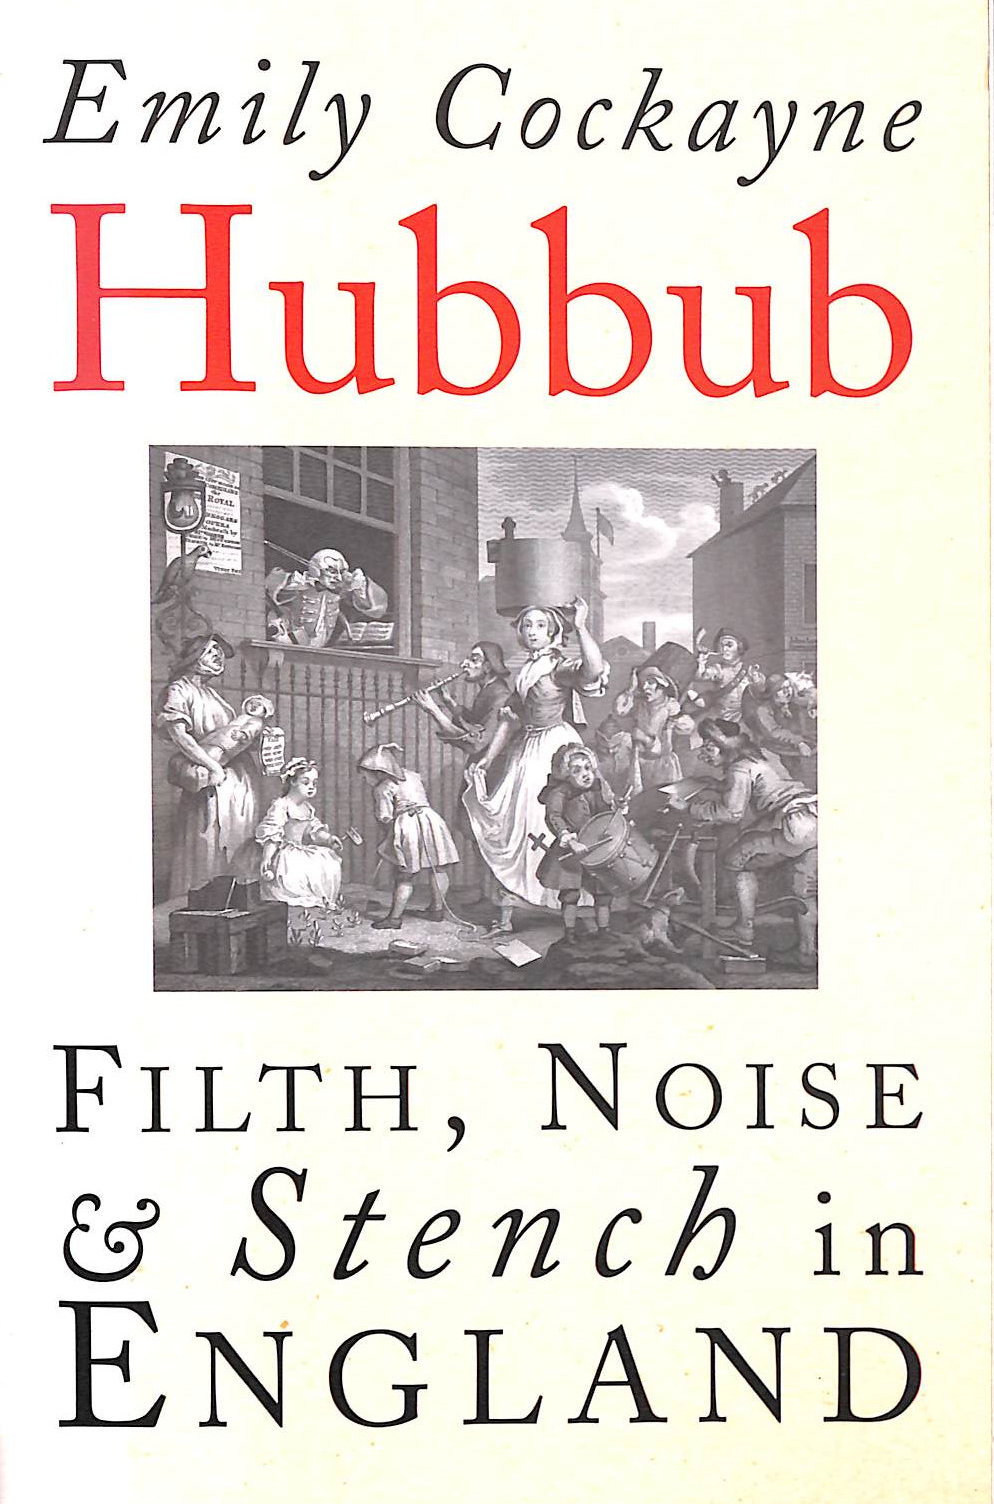 EMILY COCKAYNE - Hubbub: Filth, Noise and Stench in England, 1600-1770